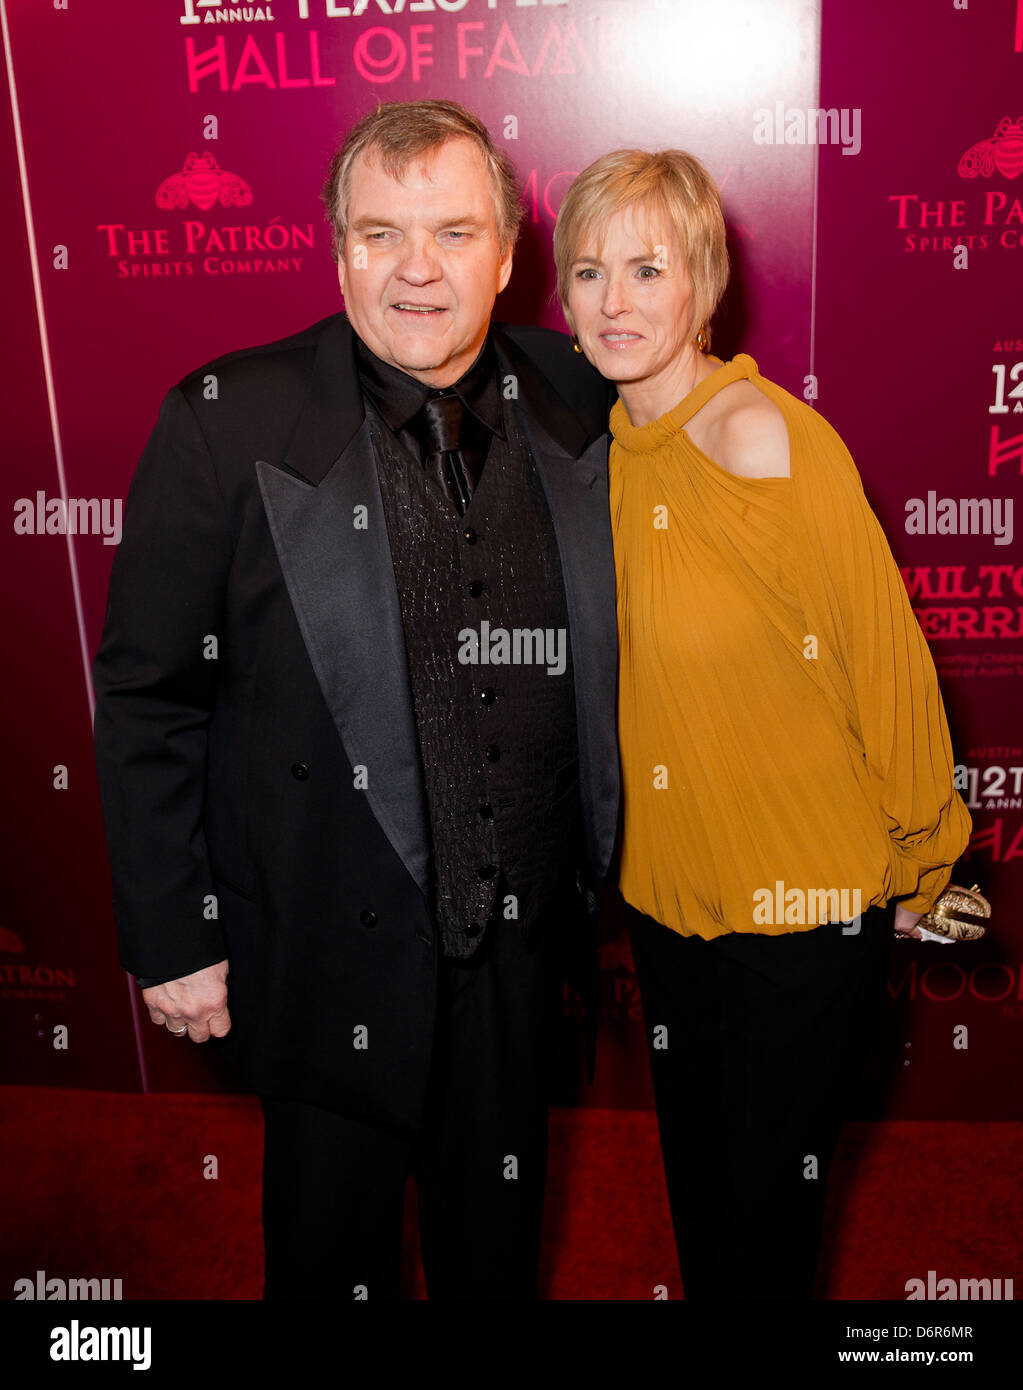 Meatloaf and his wife Leslie Aday the Texas Film Hall of Fame Awards show at ACL Live Austin, Texas - 08.03.12 Stock Photo